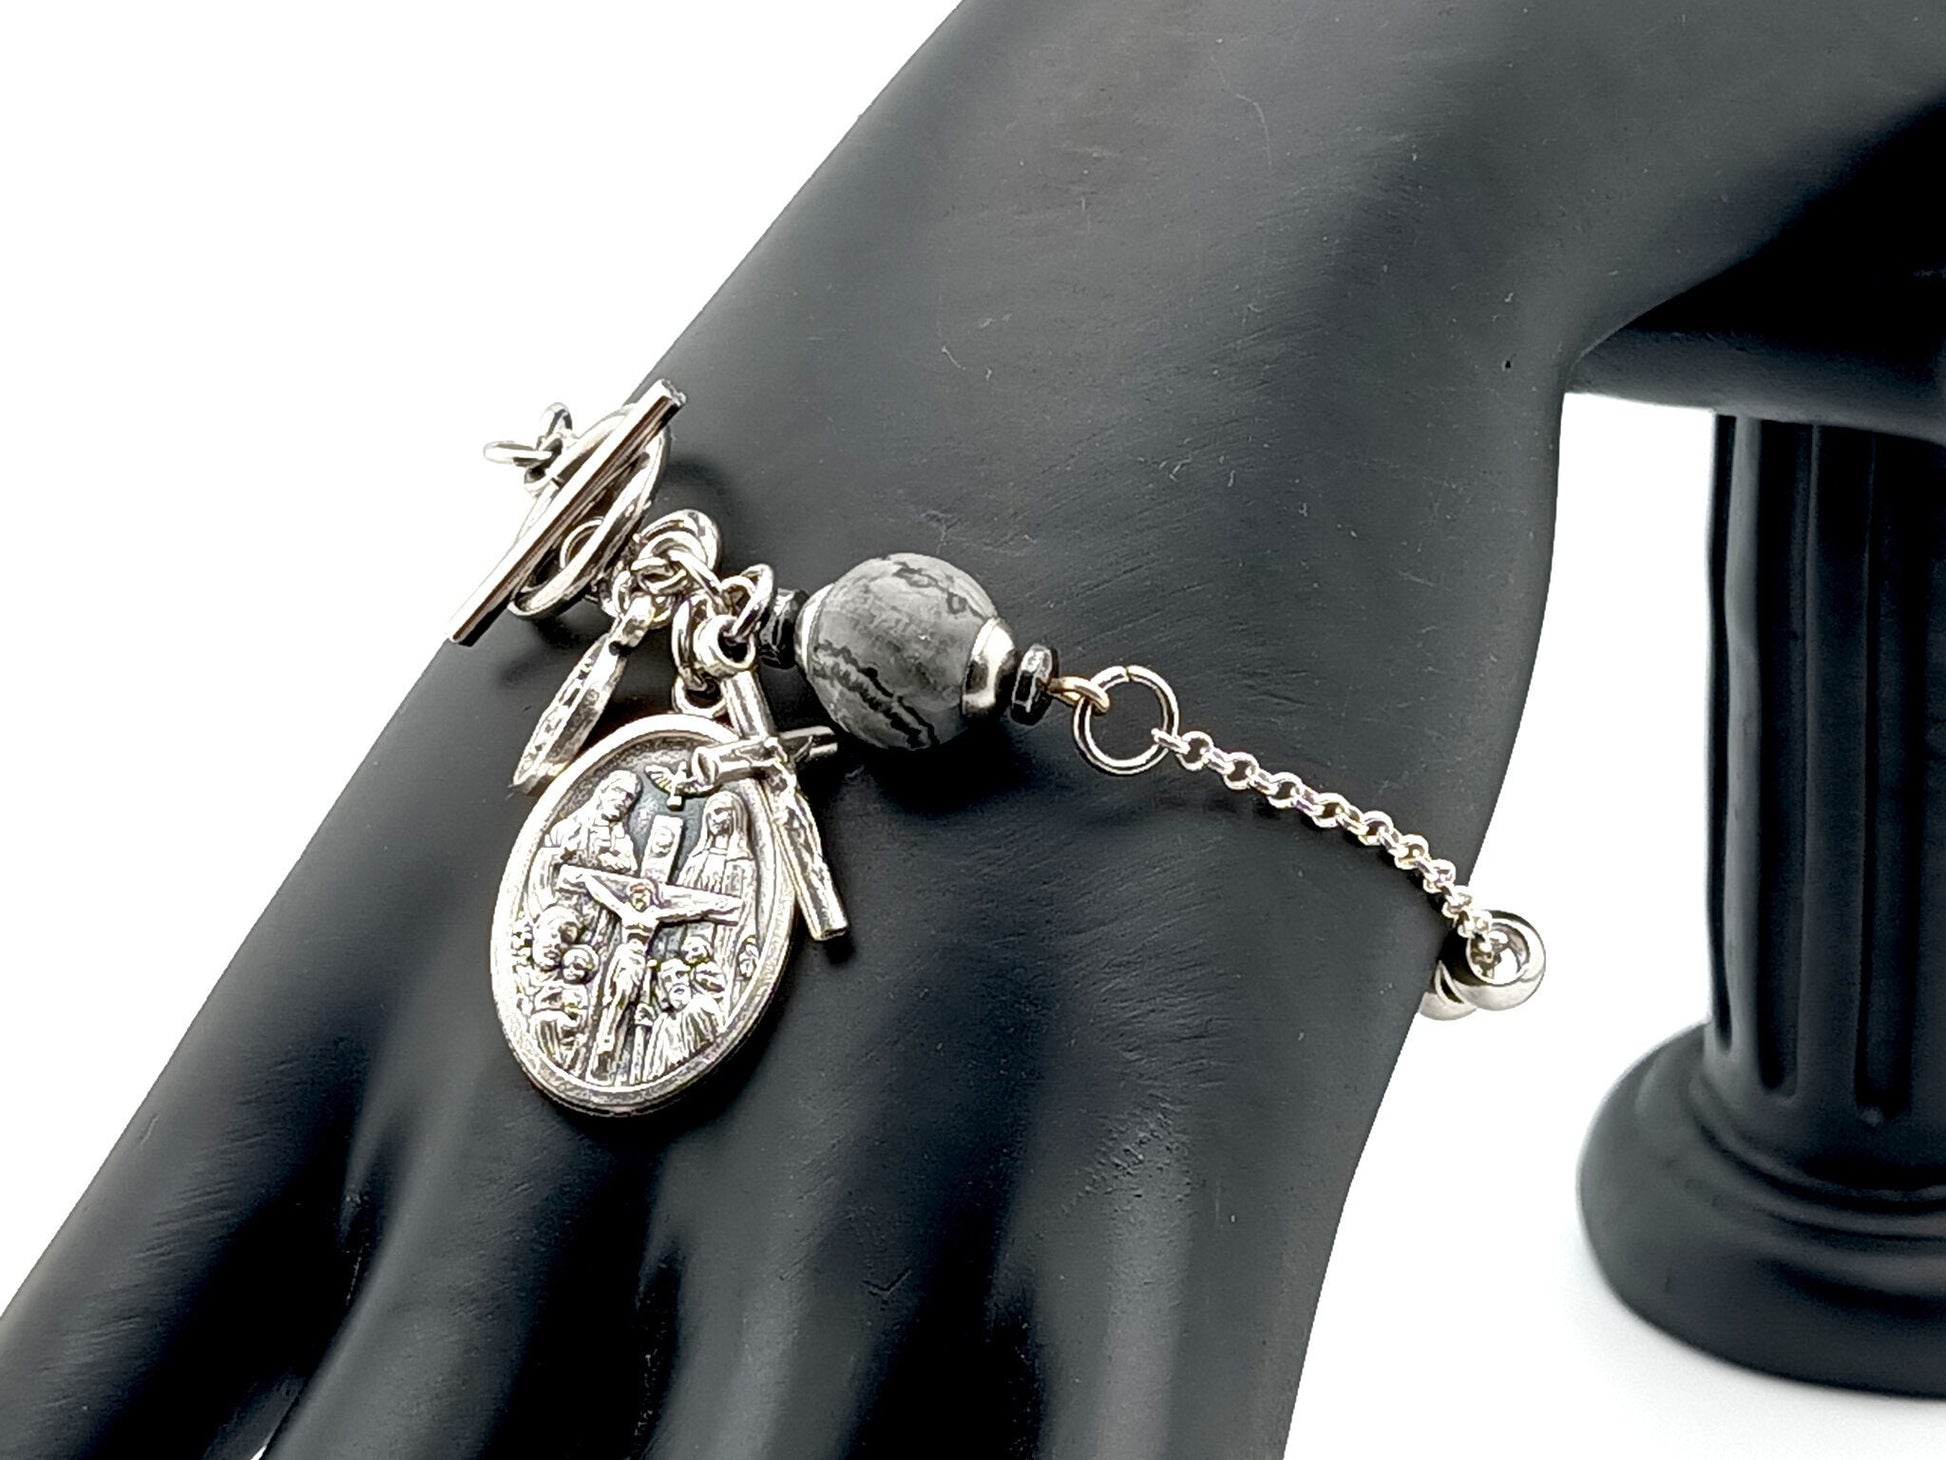 Our Lady of Mount Carmel unique rosary beads single decade rosary bracelet with stainless steel beads and 925 silver chain.